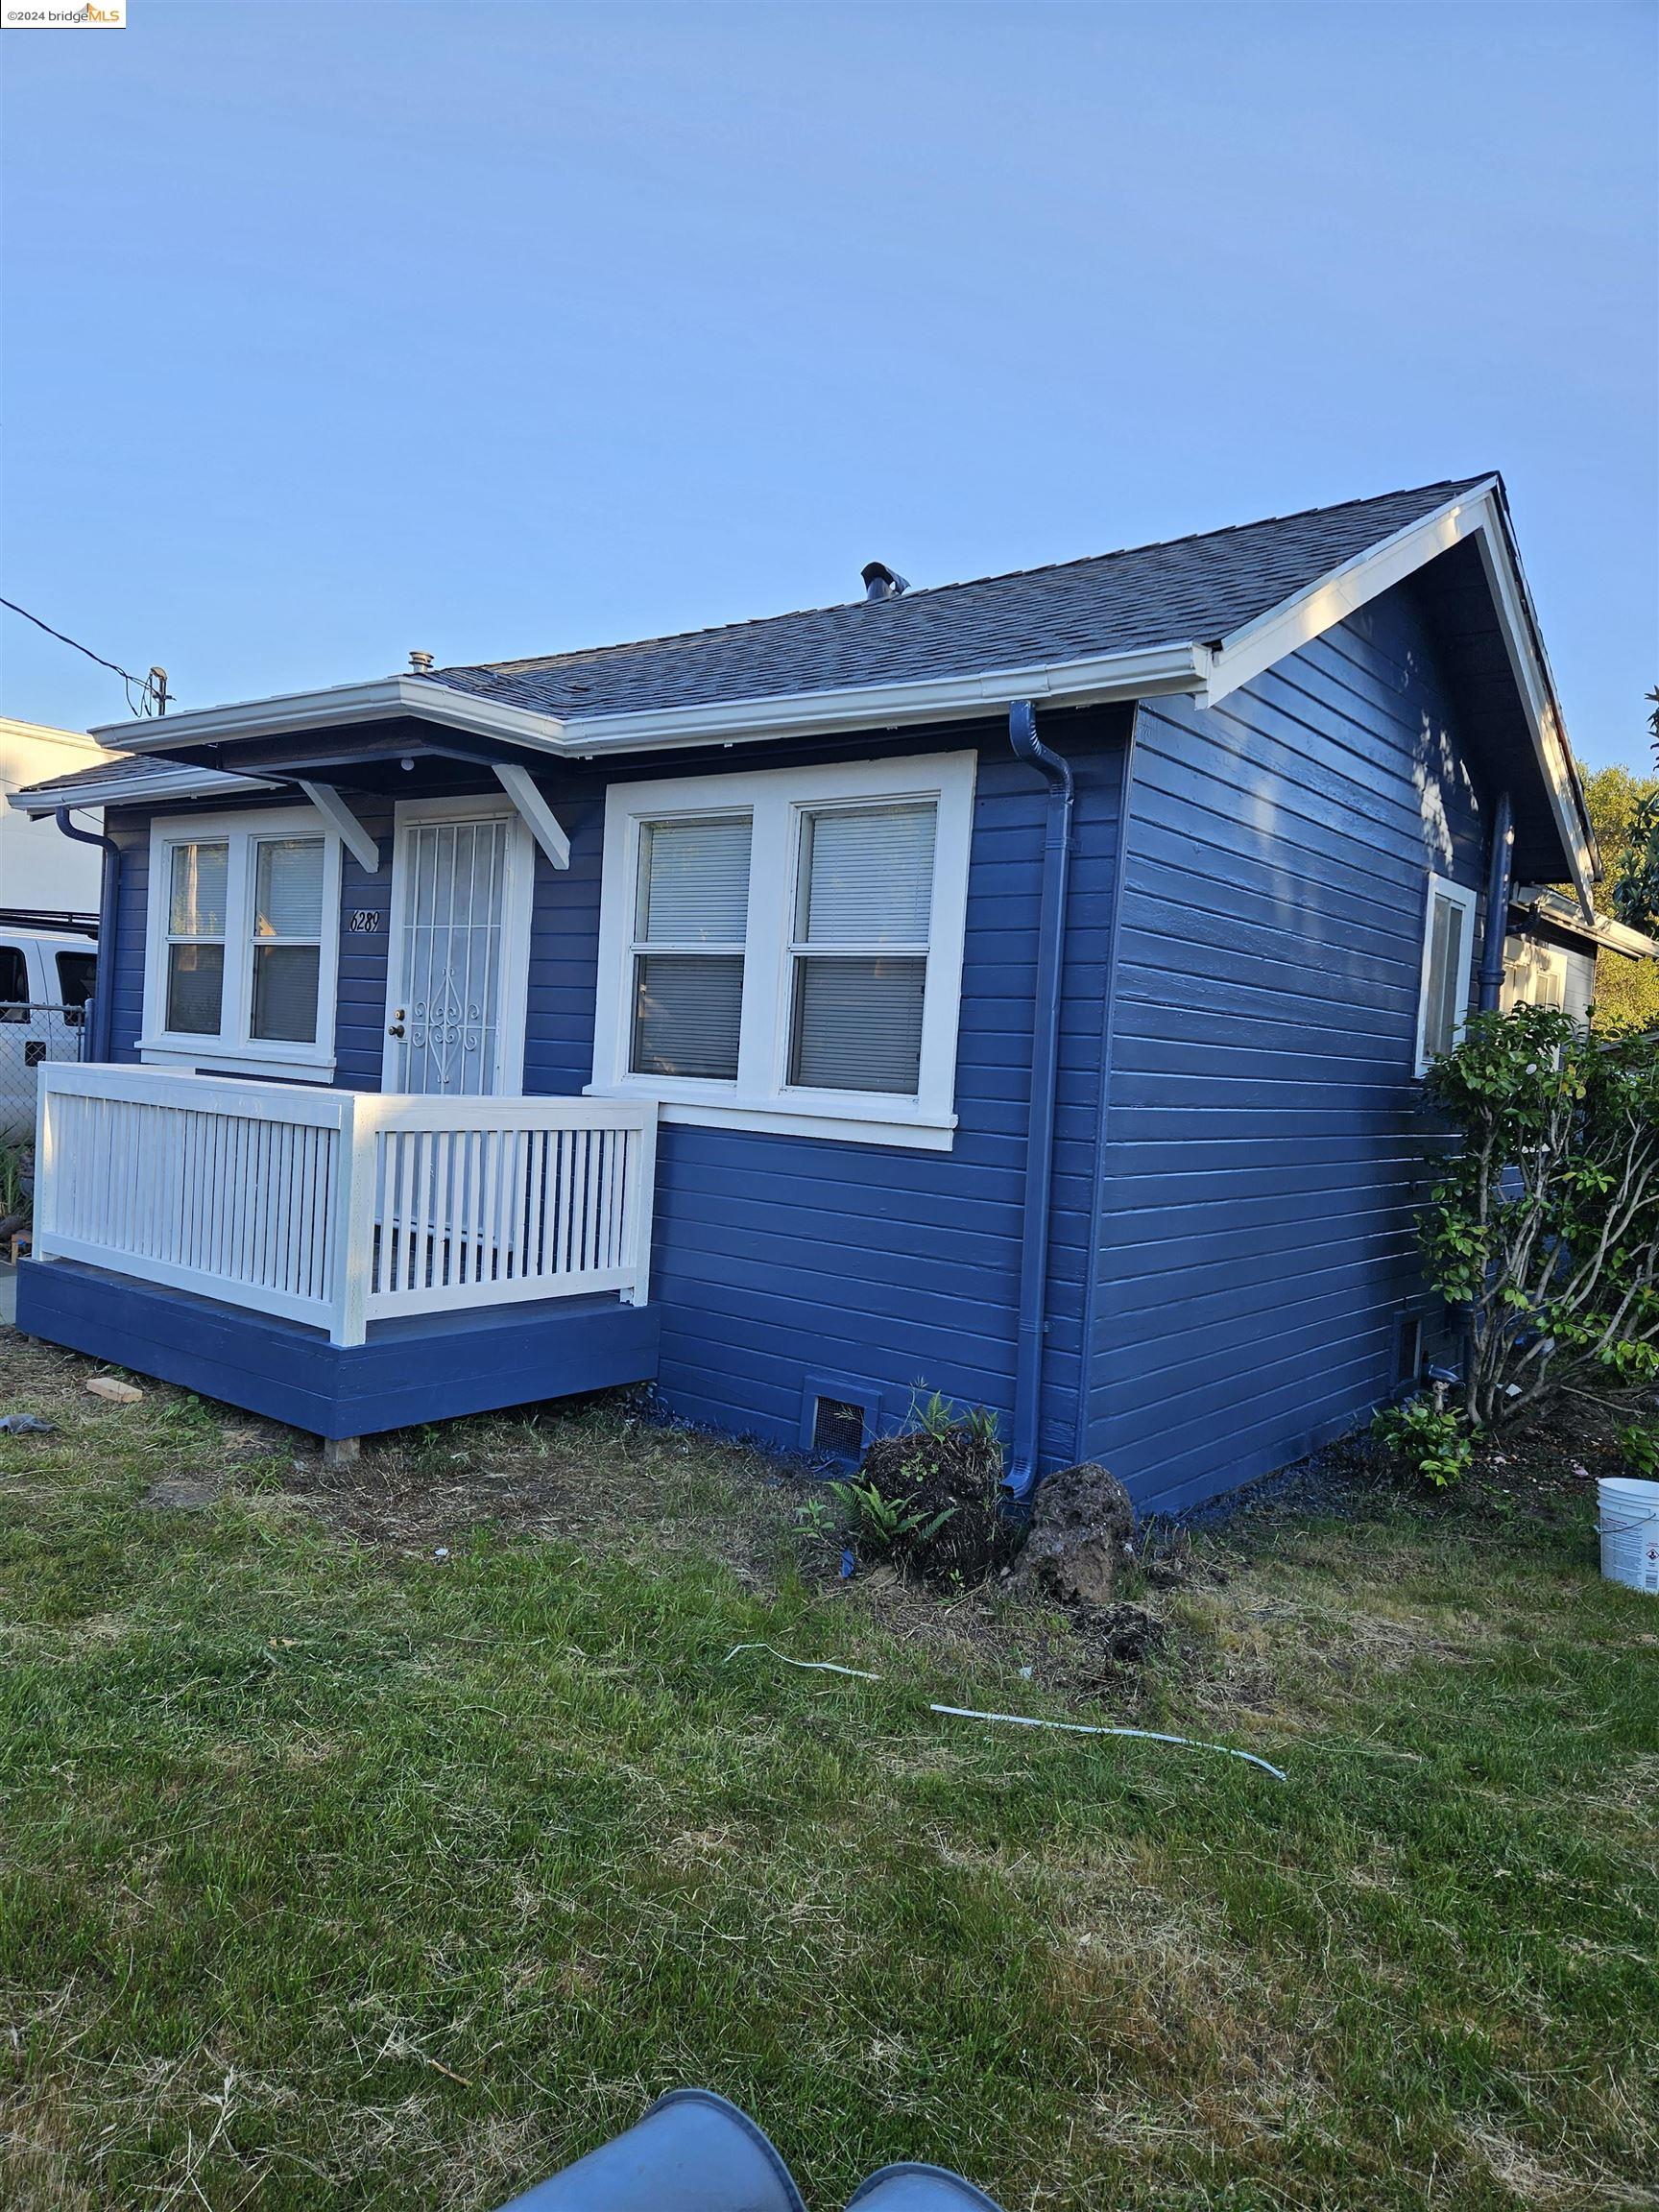 6289 Sunnymere ave, Oakland, CA 94605 Listing Photo  1